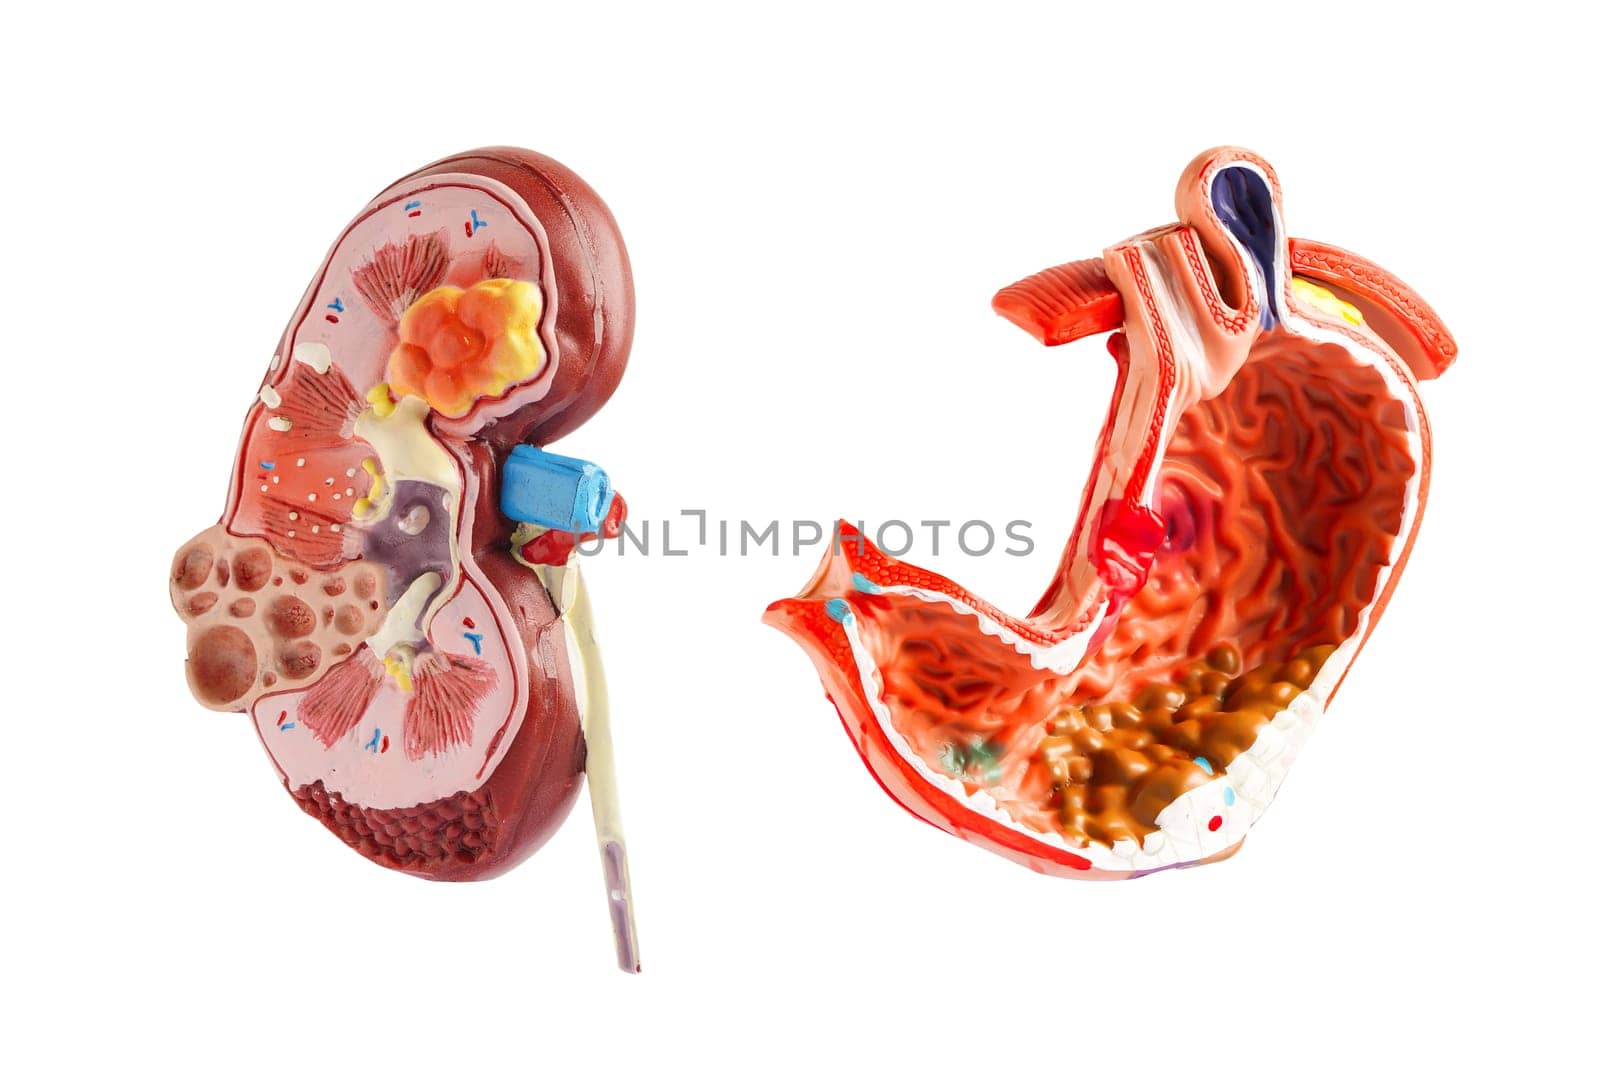 Kidney and stomach model isolated on white background. Chronic kidney disease, treatment urinary system, urology, Estimated glomerular filtration rate eGFR.